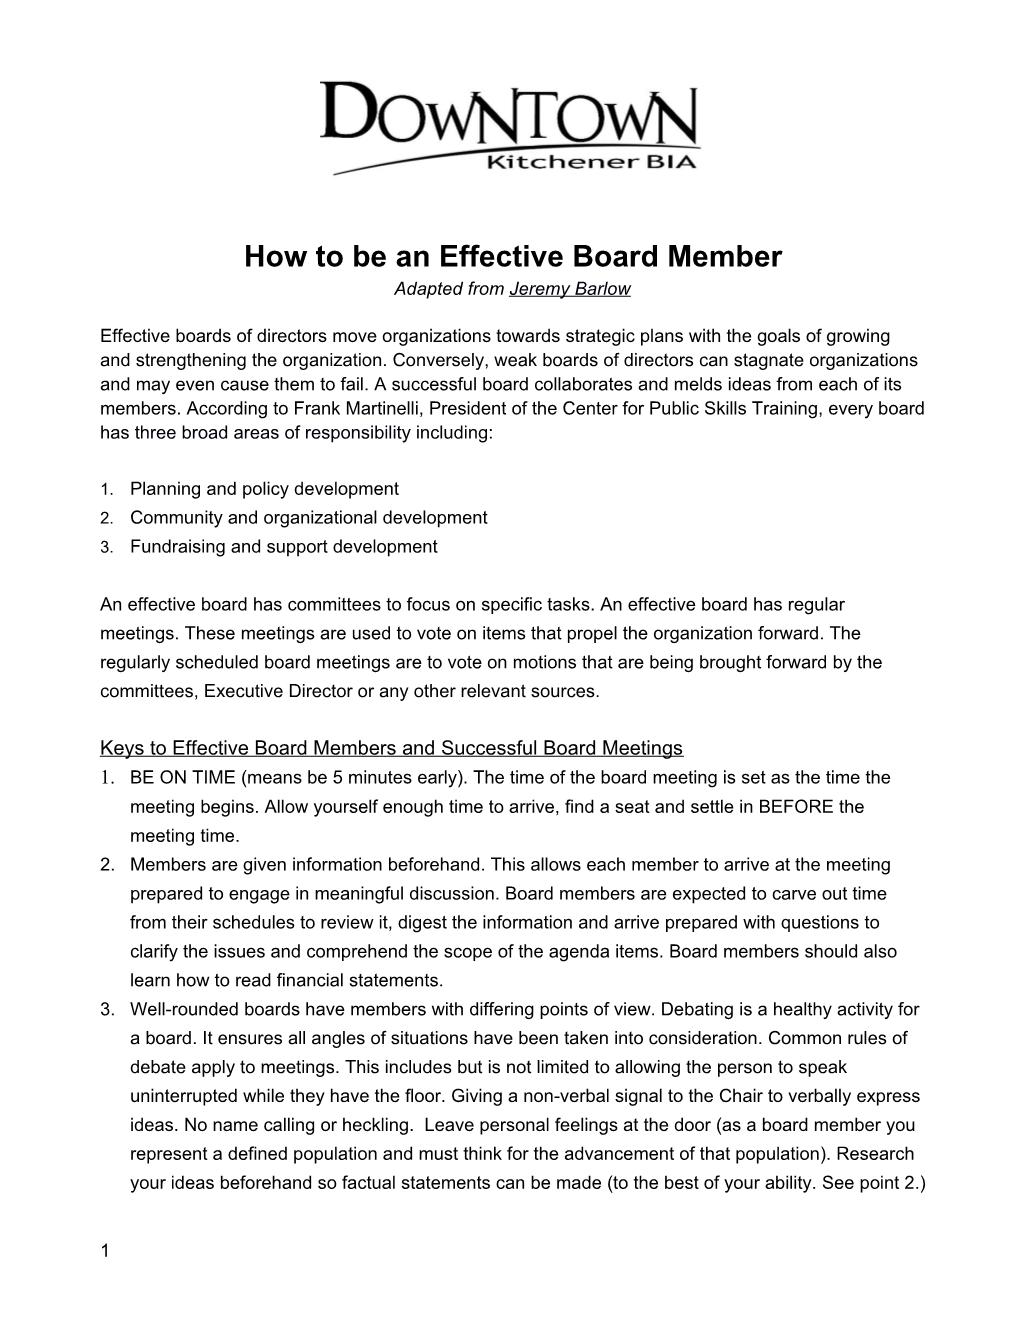 How to Be an Effective Board Member